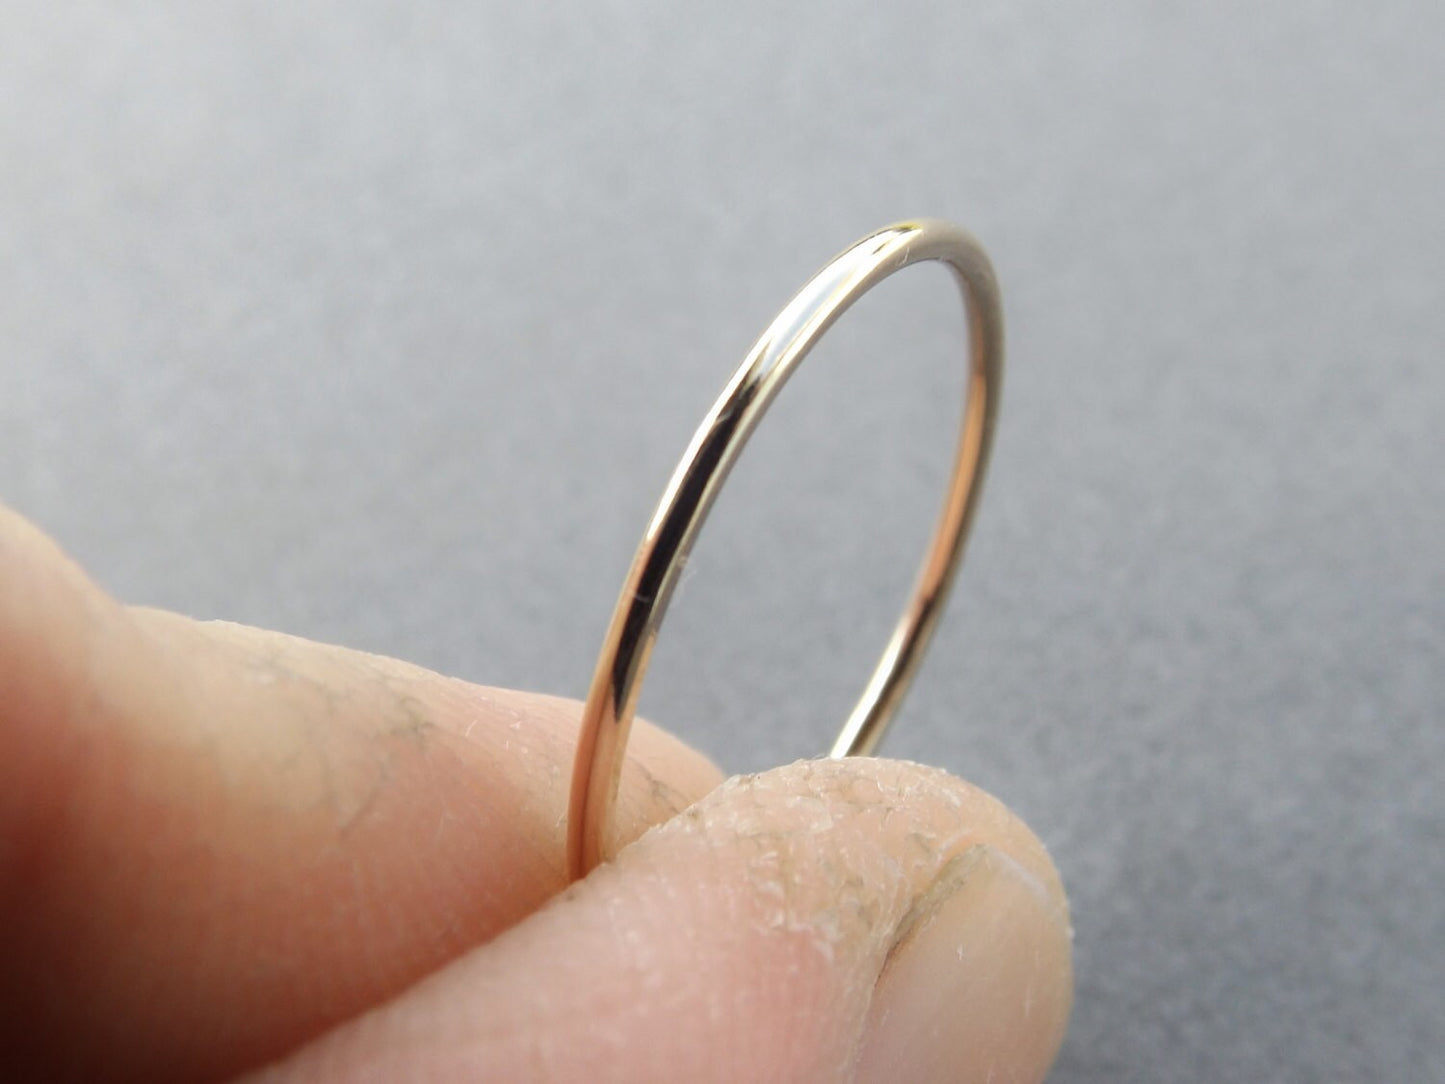 1 Smooth Slim Gold Stacking Ring,Knuckle, or Thumb Rings,Gold Rings,Stacking Rings,Knuckle Rings,Skinny Rings,Thin Rings, Slim Ring